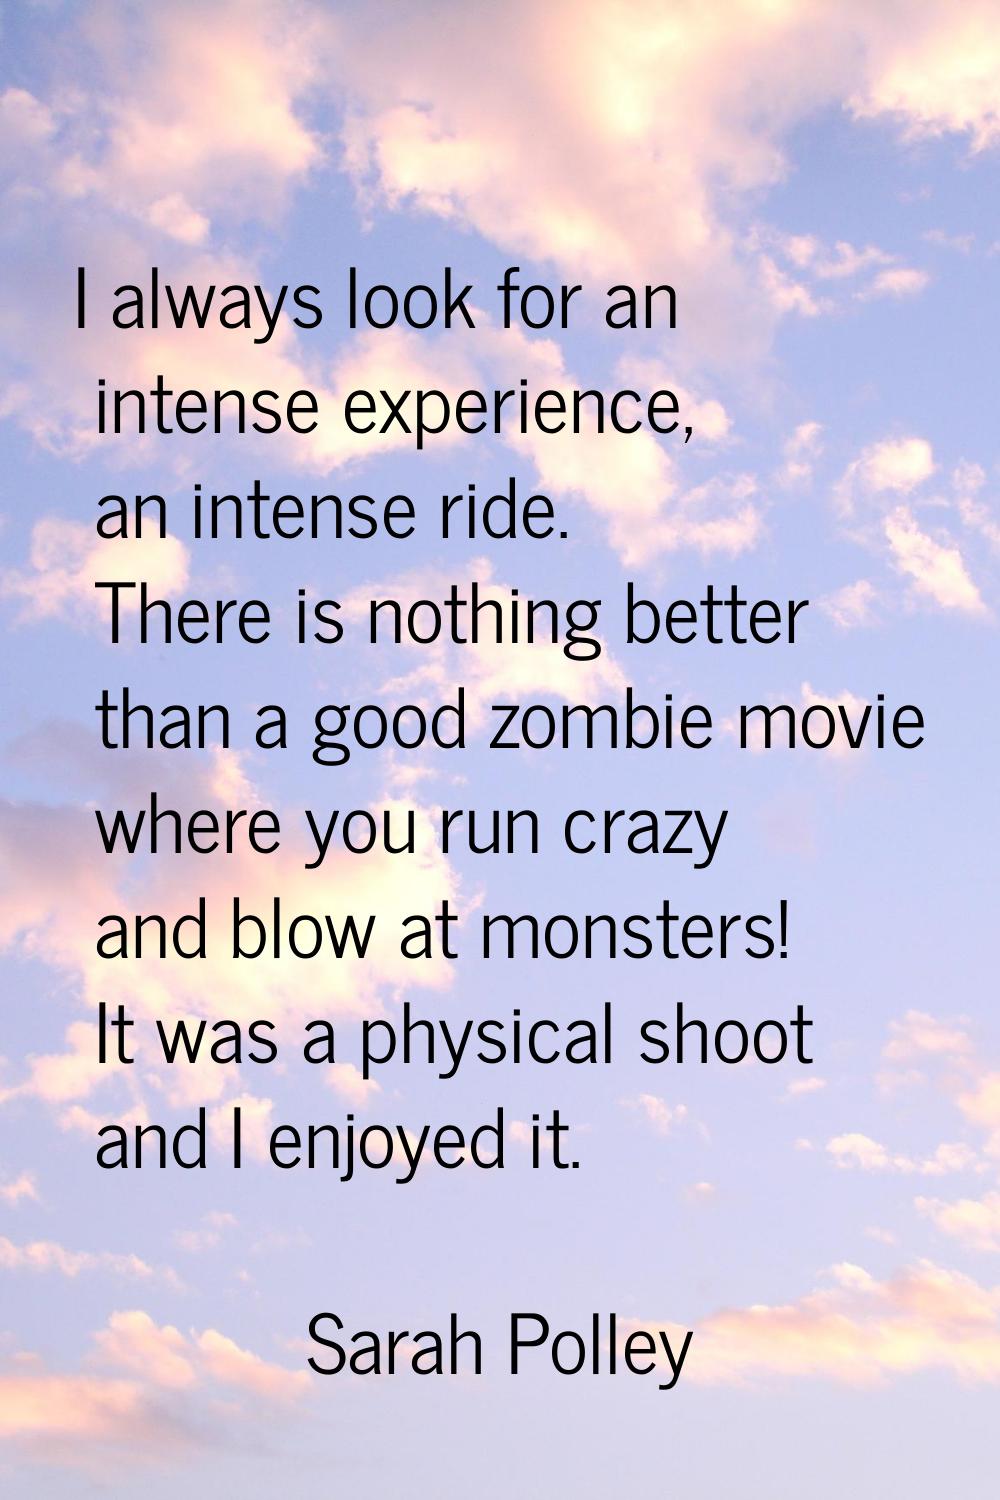 I always look for an intense experience, an intense ride. There is nothing better than a good zombi